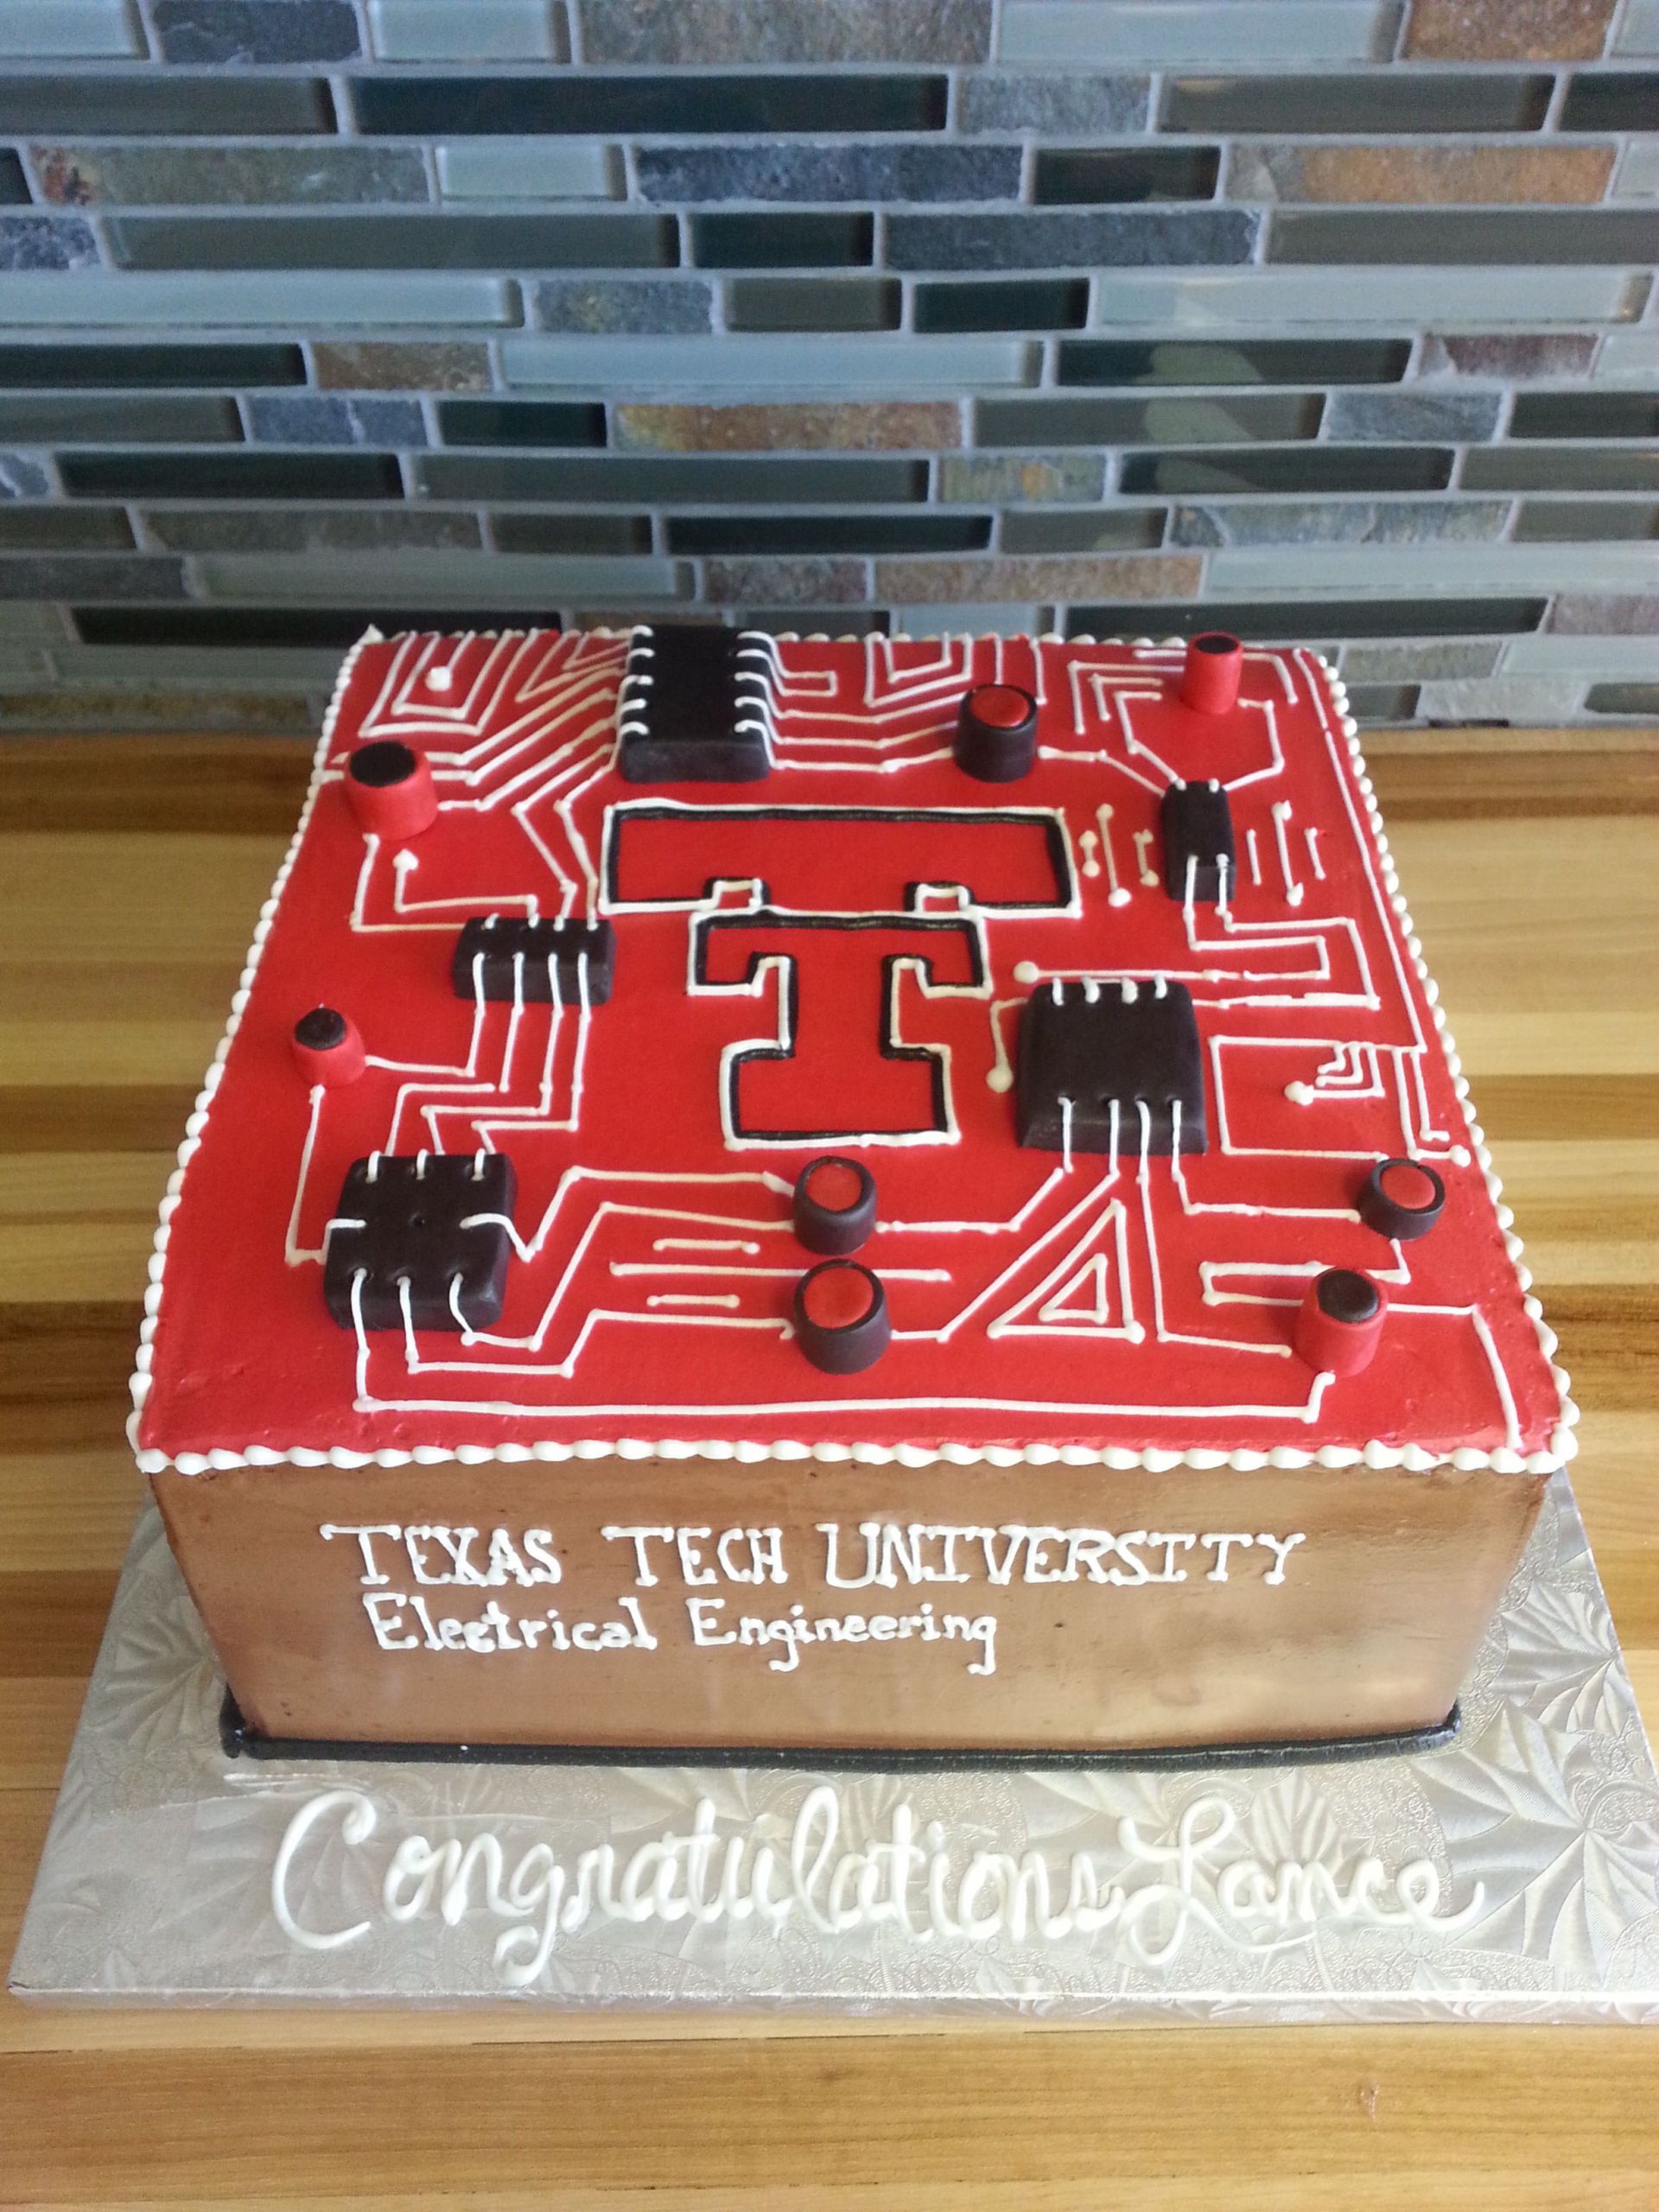 Engineering Graduation Party Ideas
 Electrical engineering graduation cake